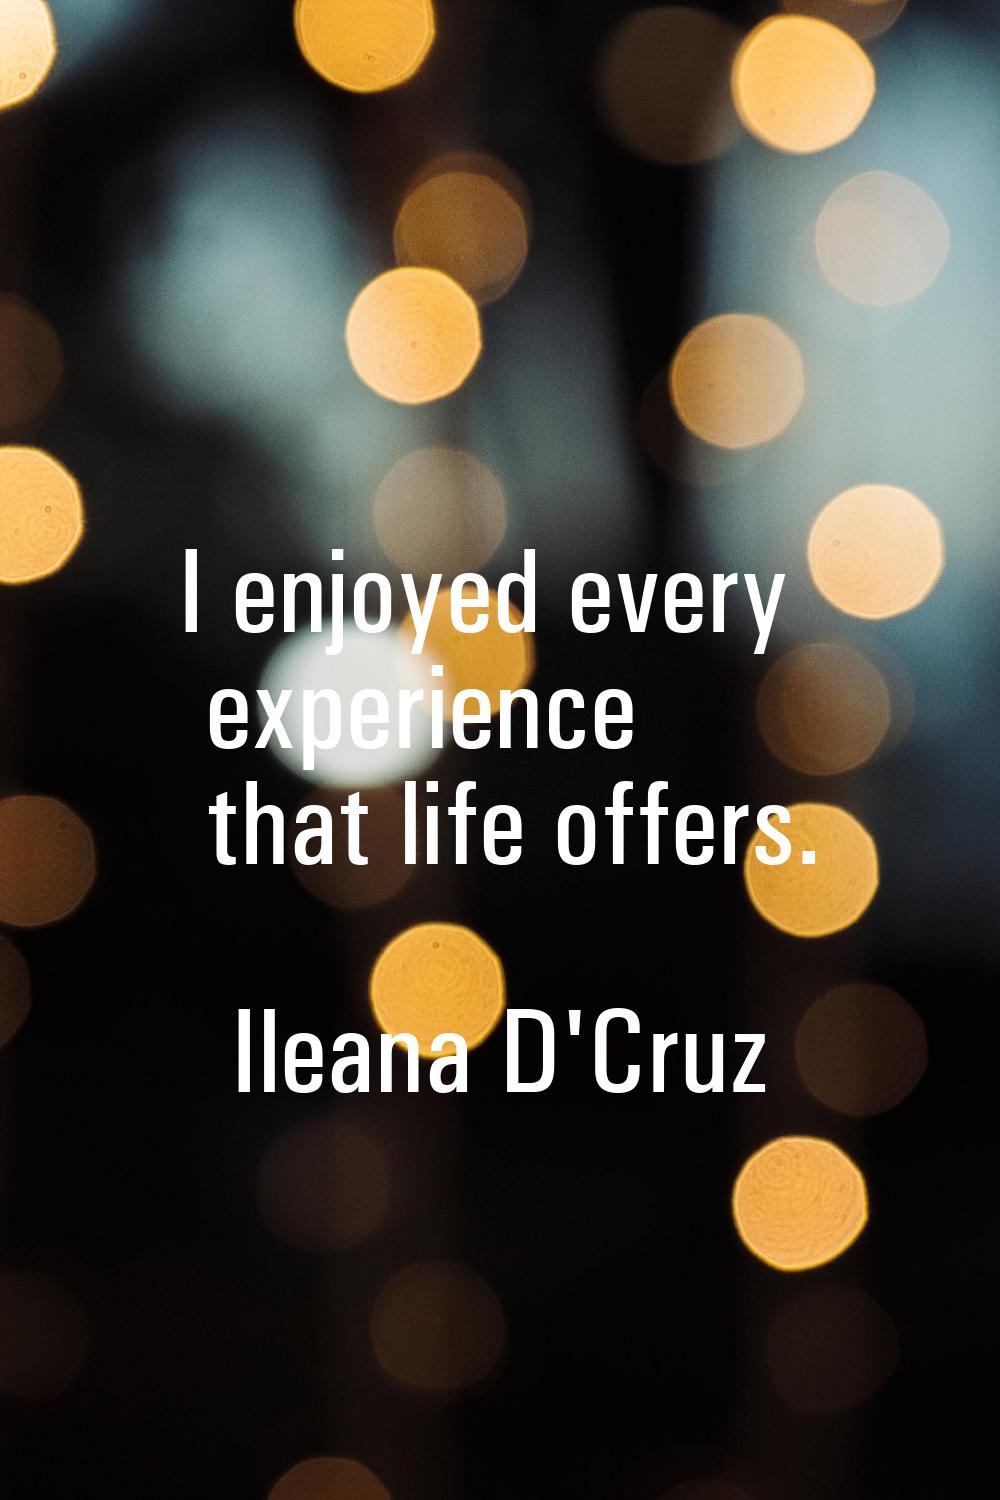 I enjoyed every experience that life offers.